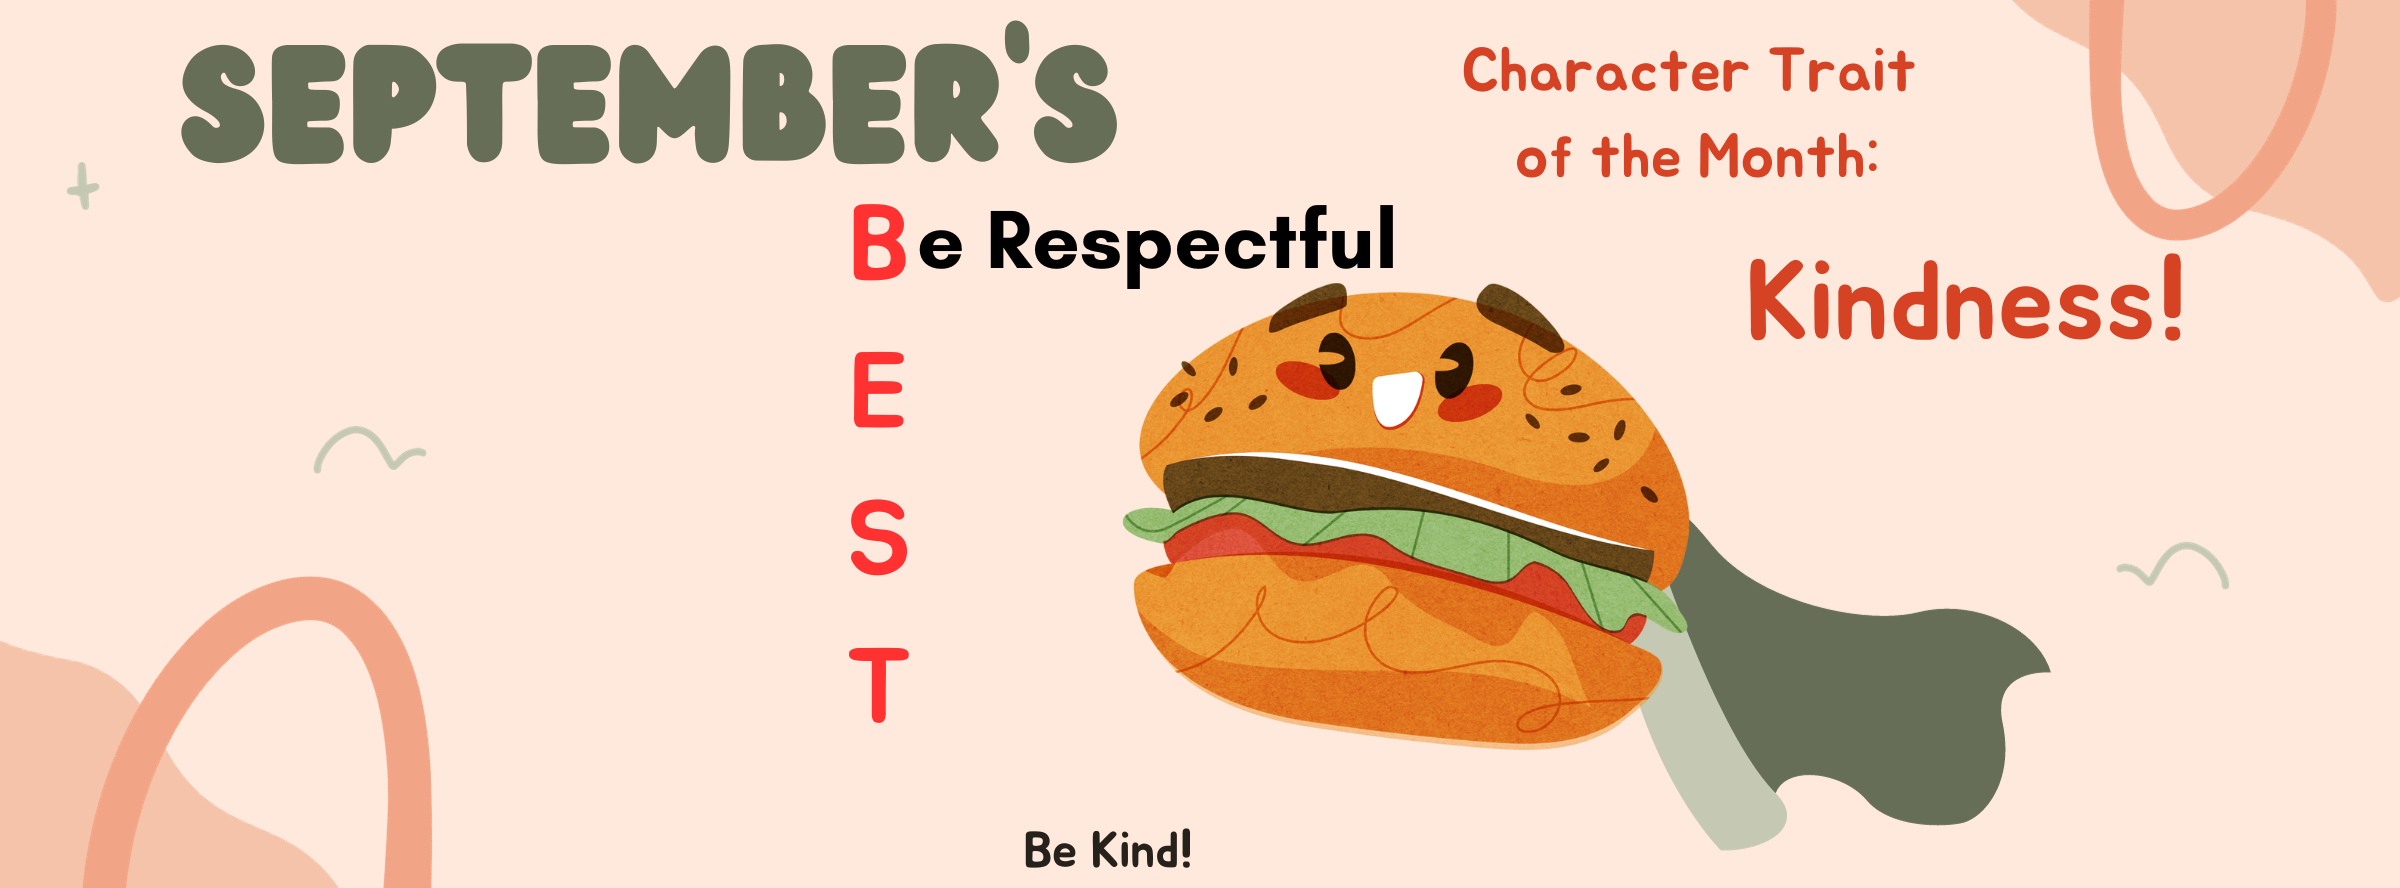 September's Character Trait of the Month is Kindness